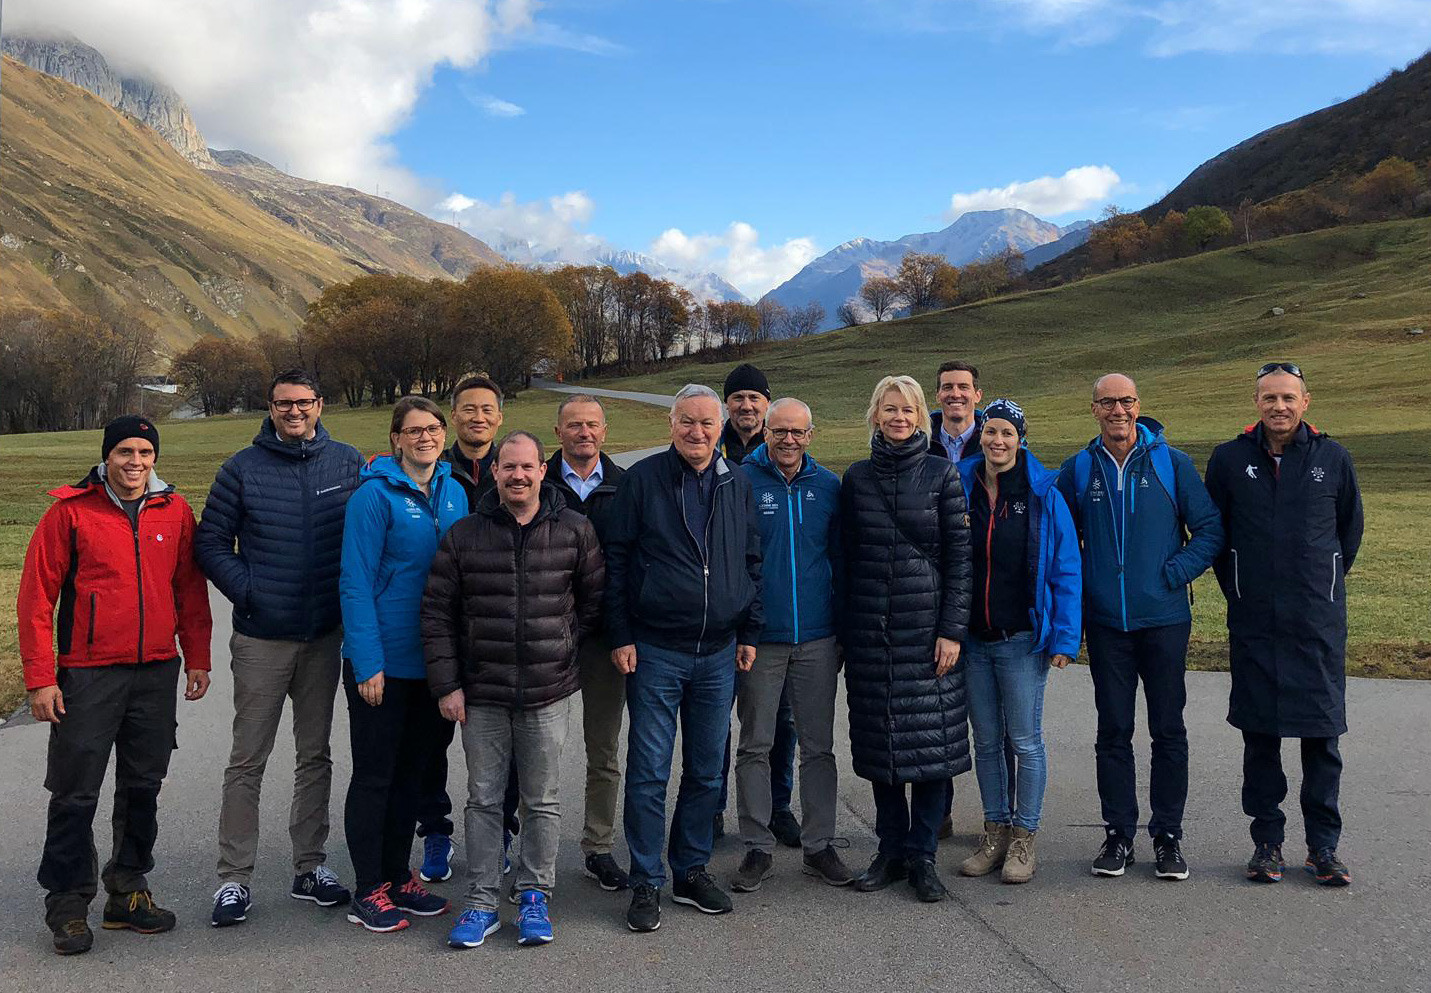 Winter Universiade Committee returns to Lucerne to assess 2021 preparations